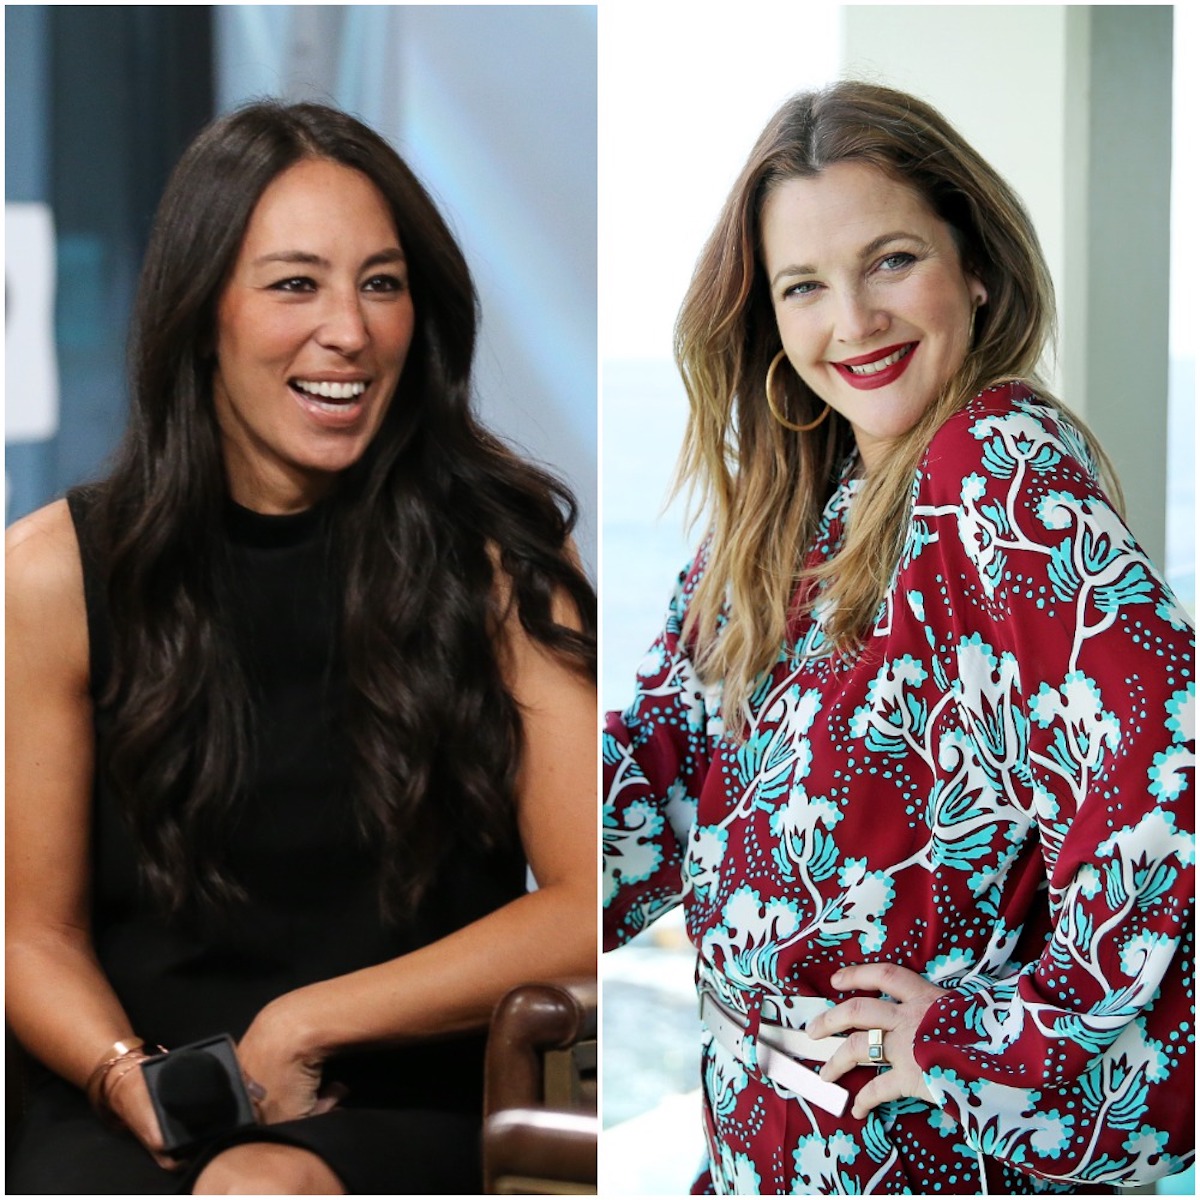 Joanna Gaines and Drew Barrymore posing in separate photos.